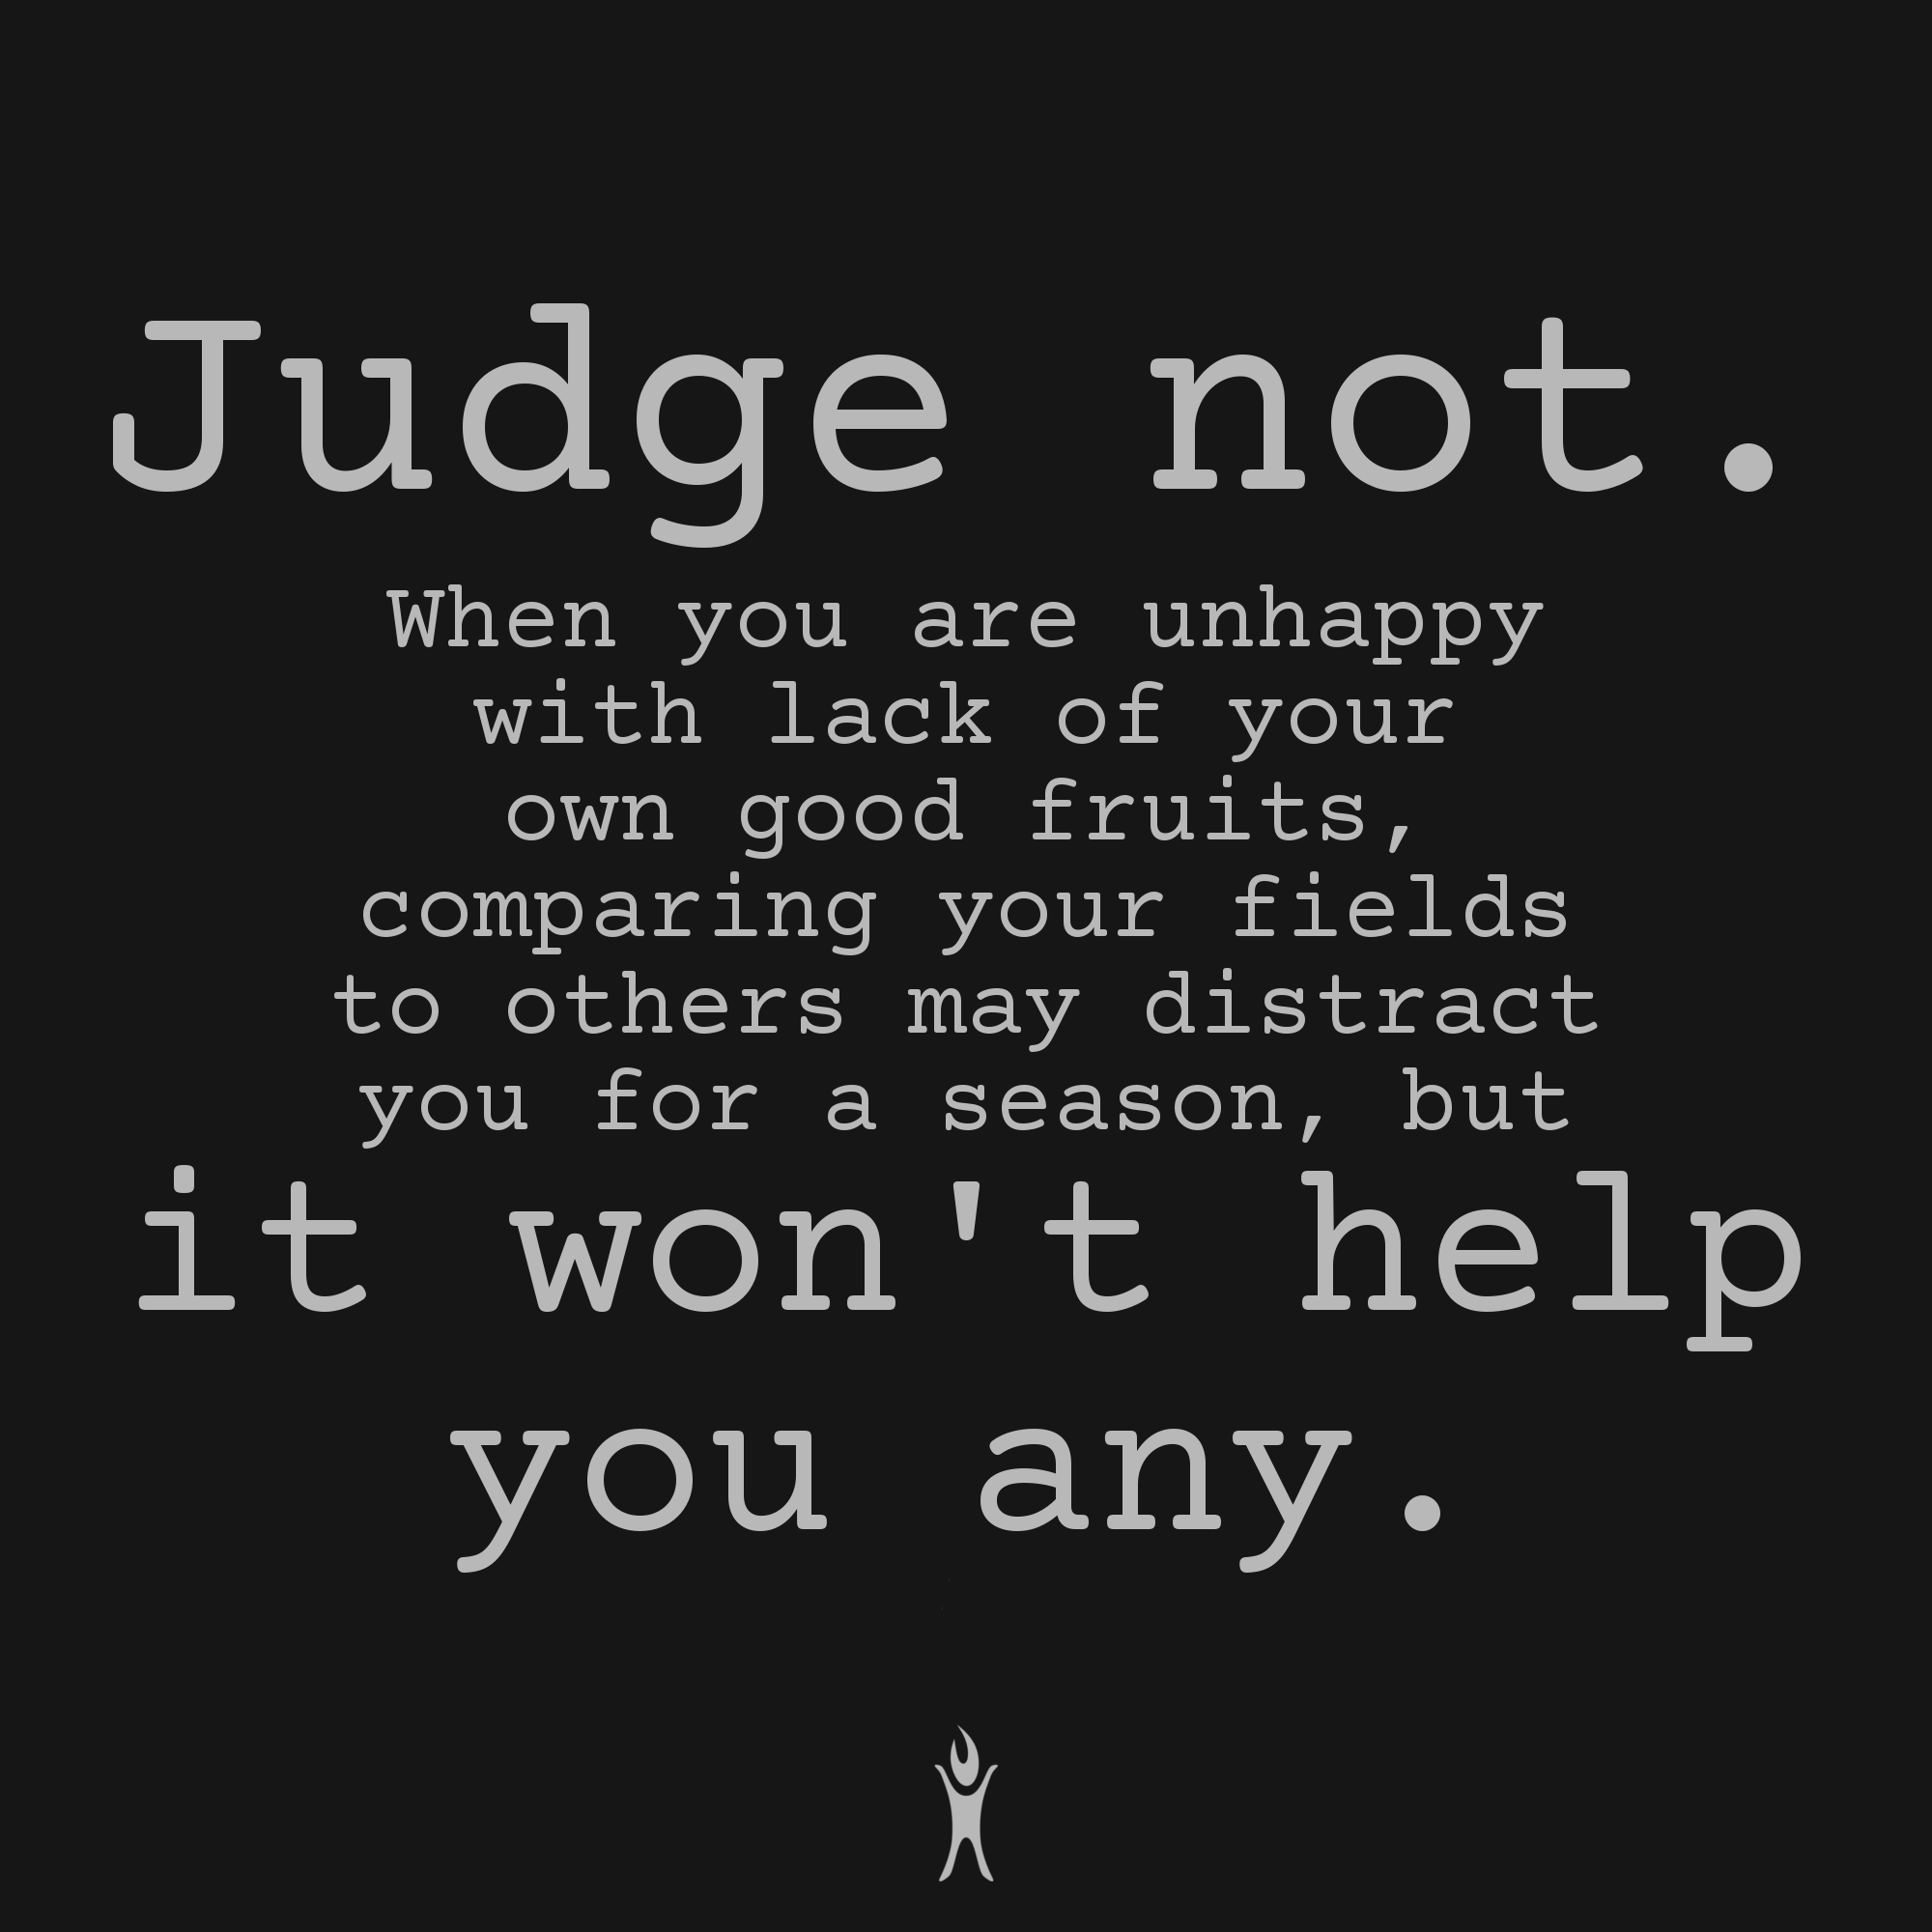 Judge not. It won't help you any.